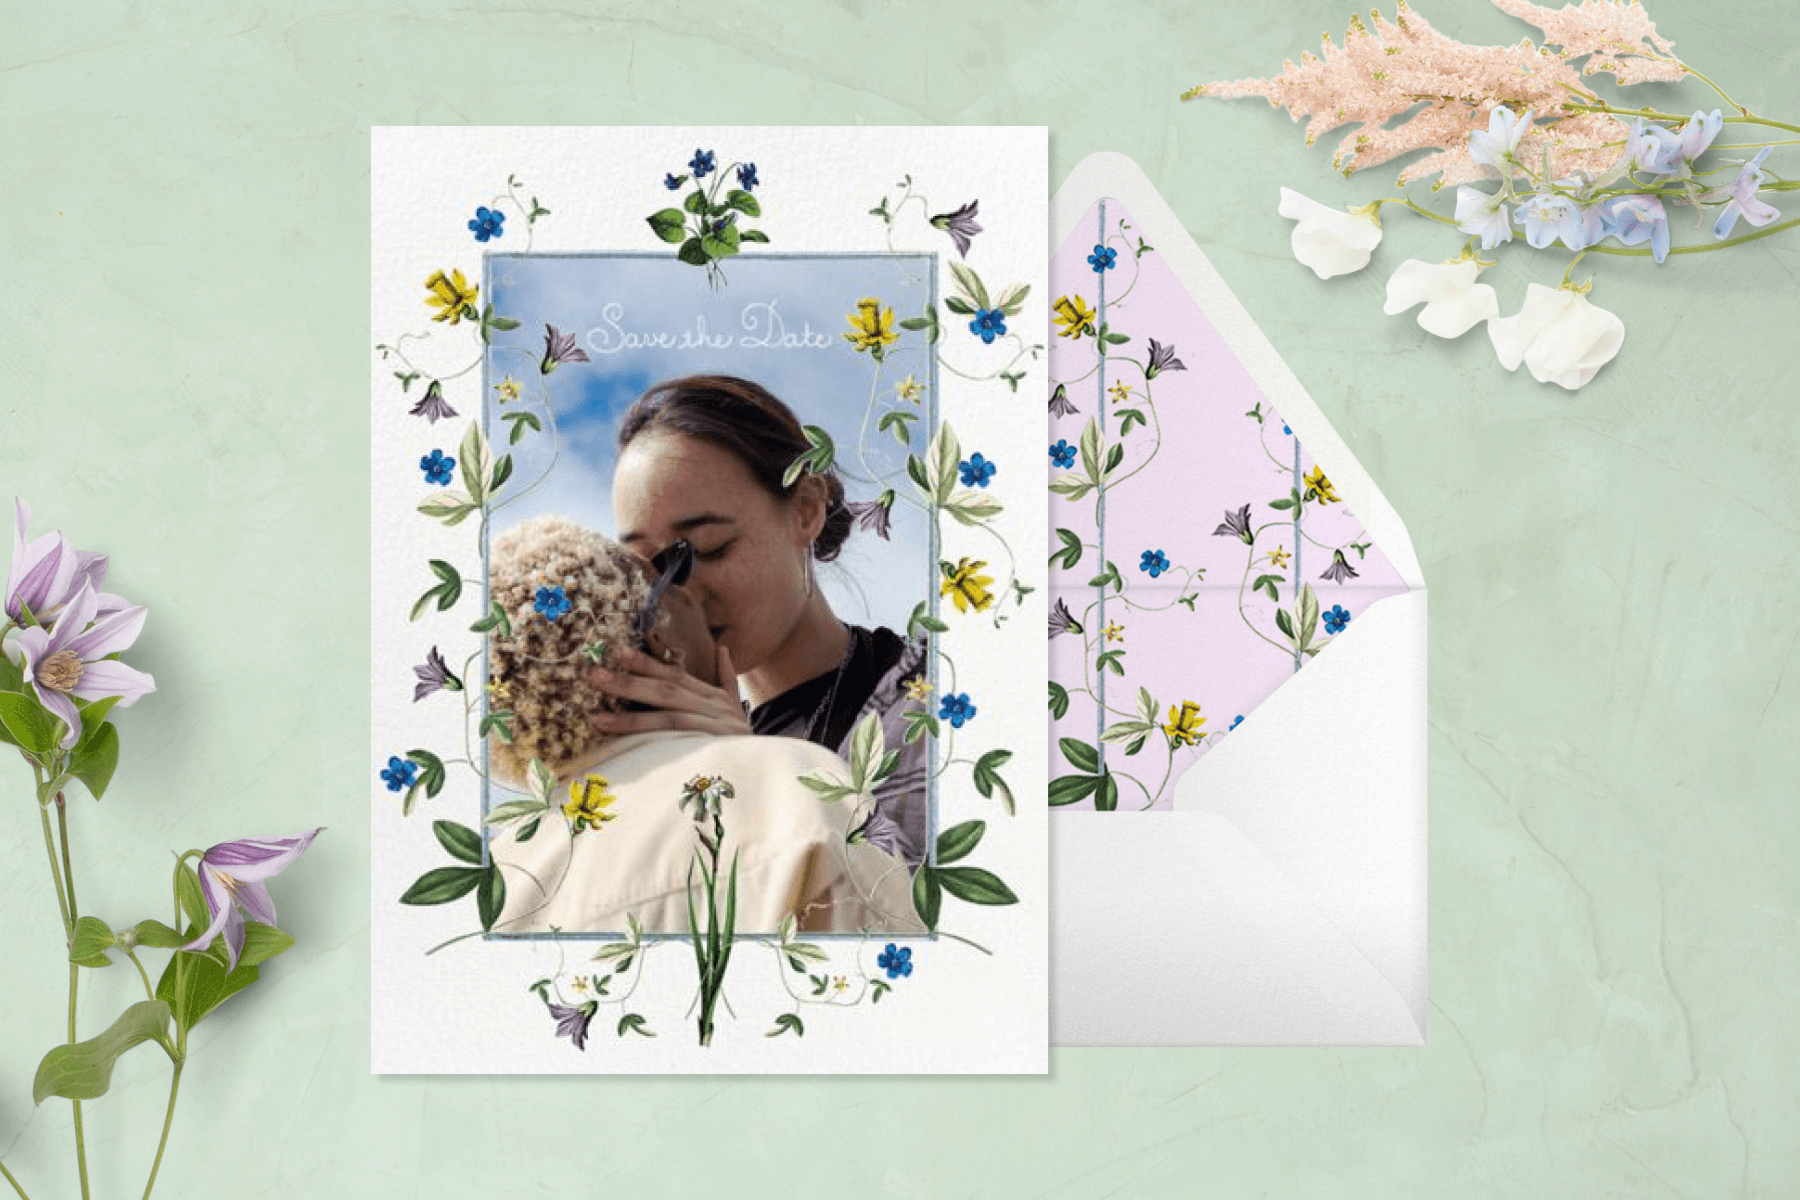 A vertical save the date with a photo of two people kissing with a border of delicate flowers and vines. The background is a pastel green with pastel flowers laid out on either side and a matching envelope.